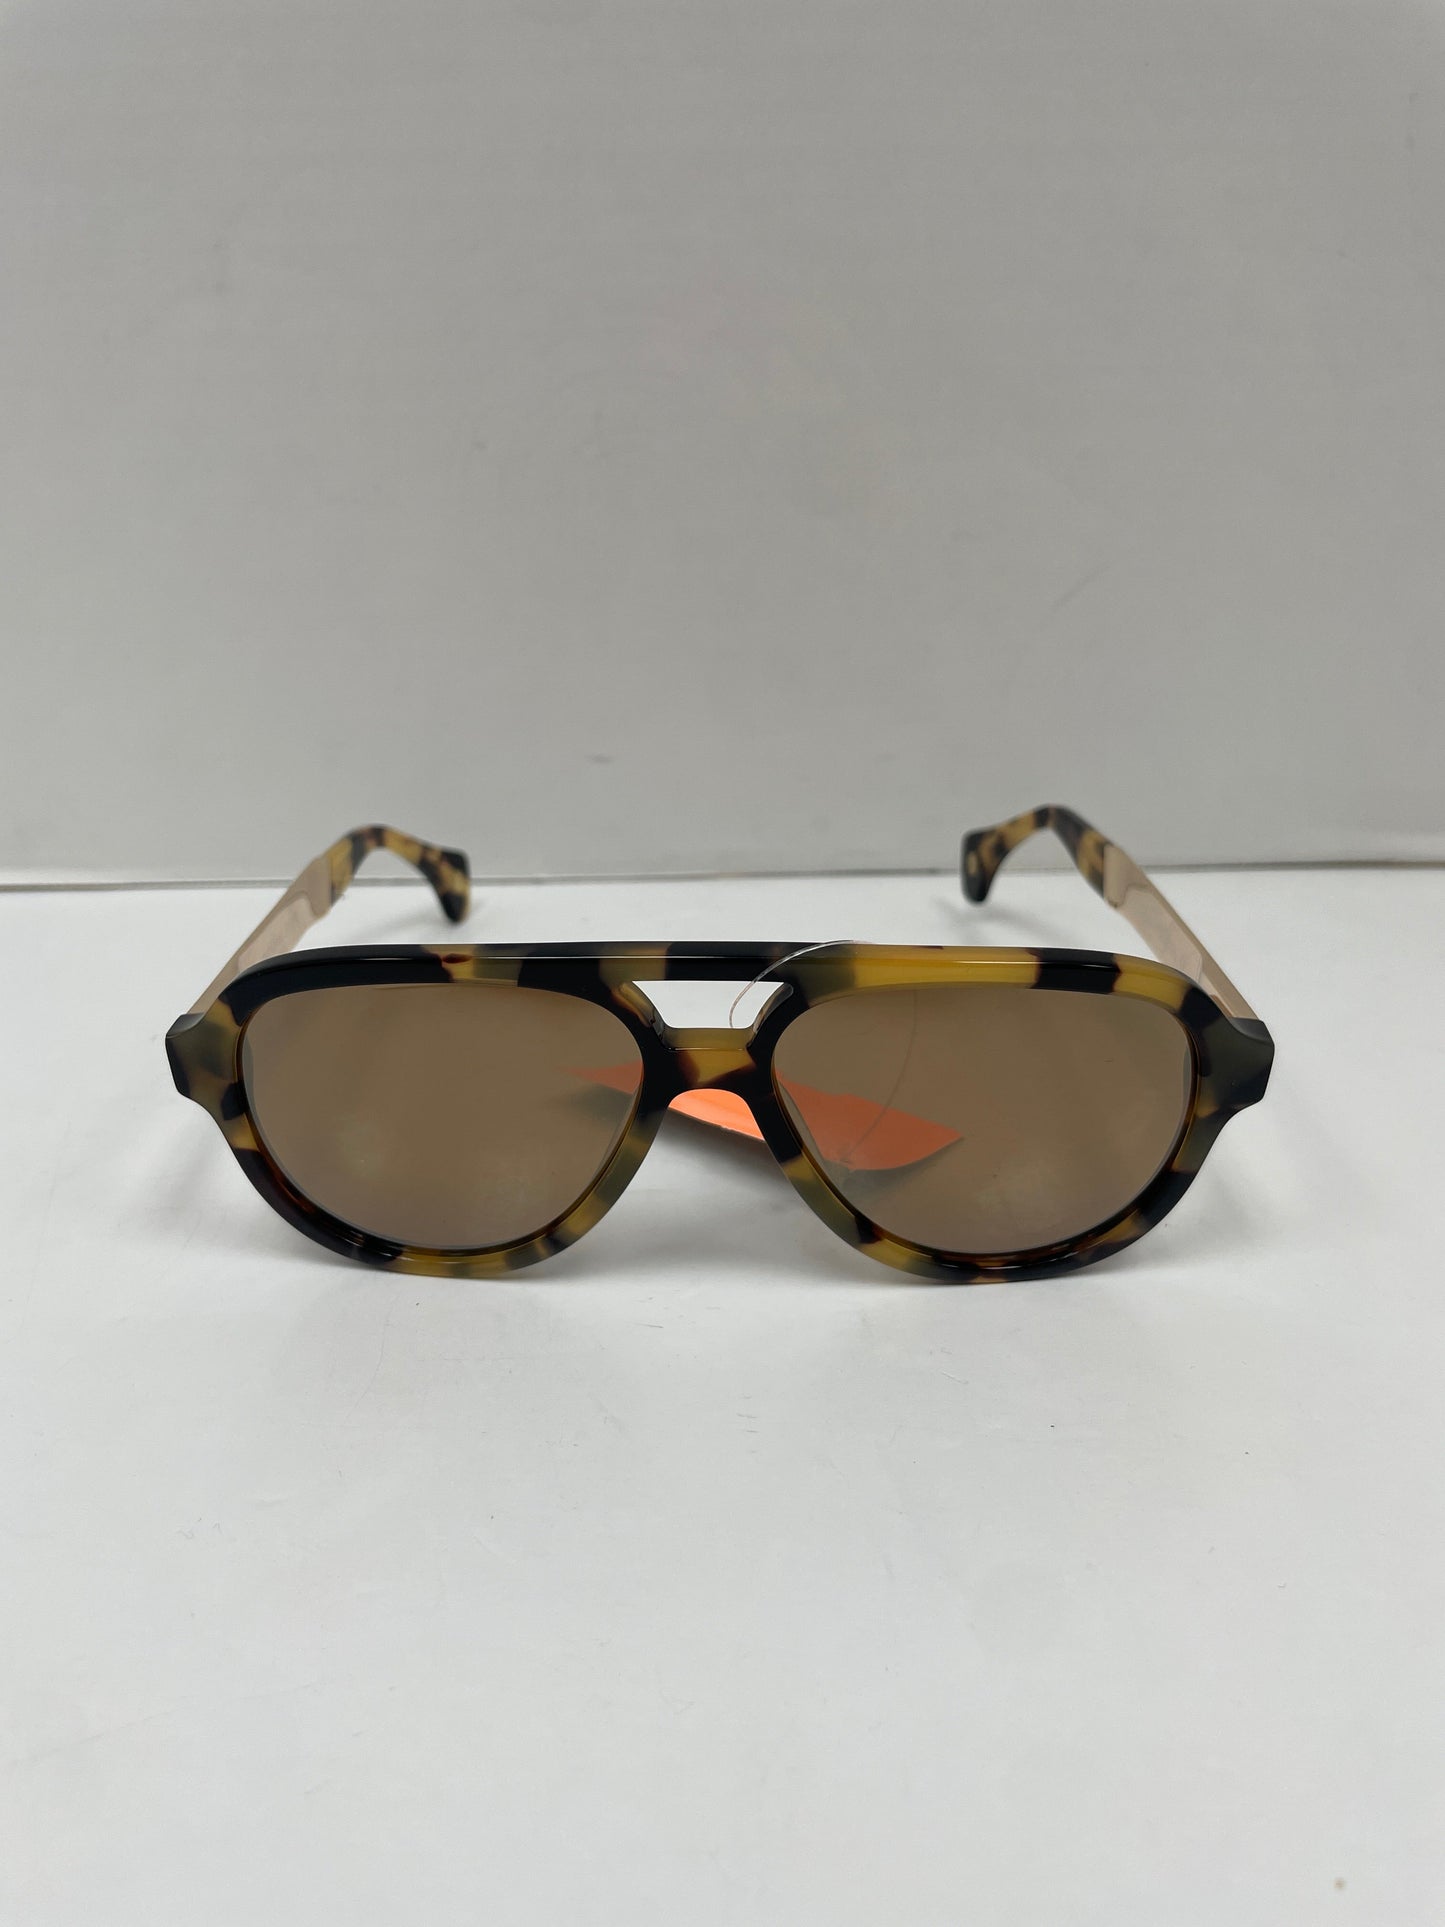 Sunglasses By Cmf